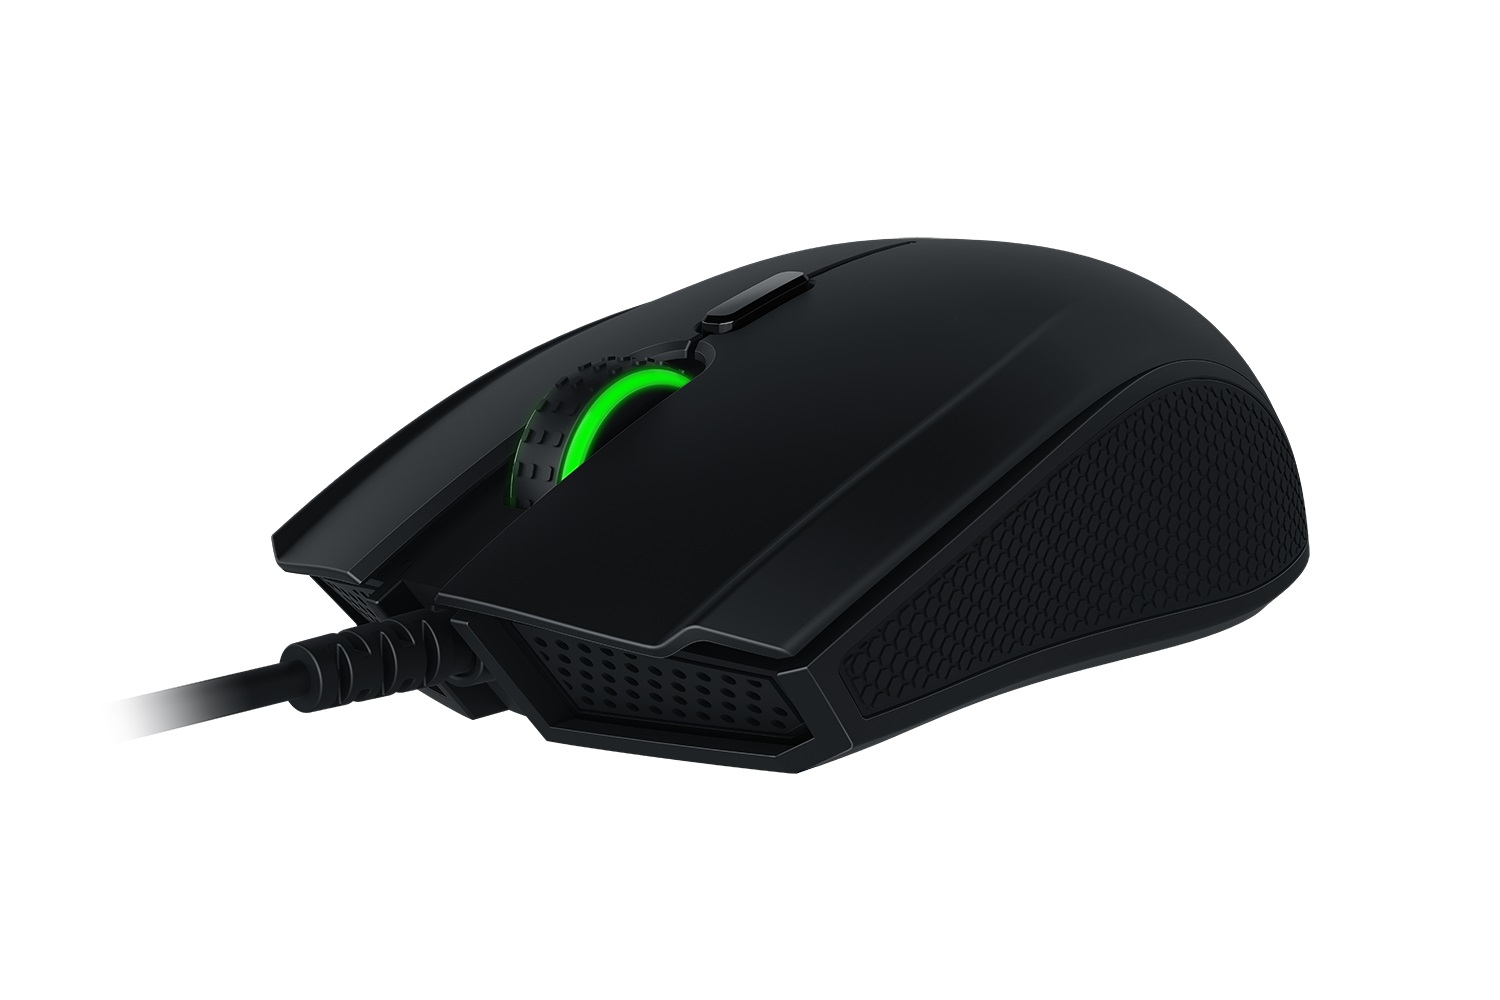 Razer’s Abyssus V2 Entry Level Gaming Mouse Available for Pre-Order